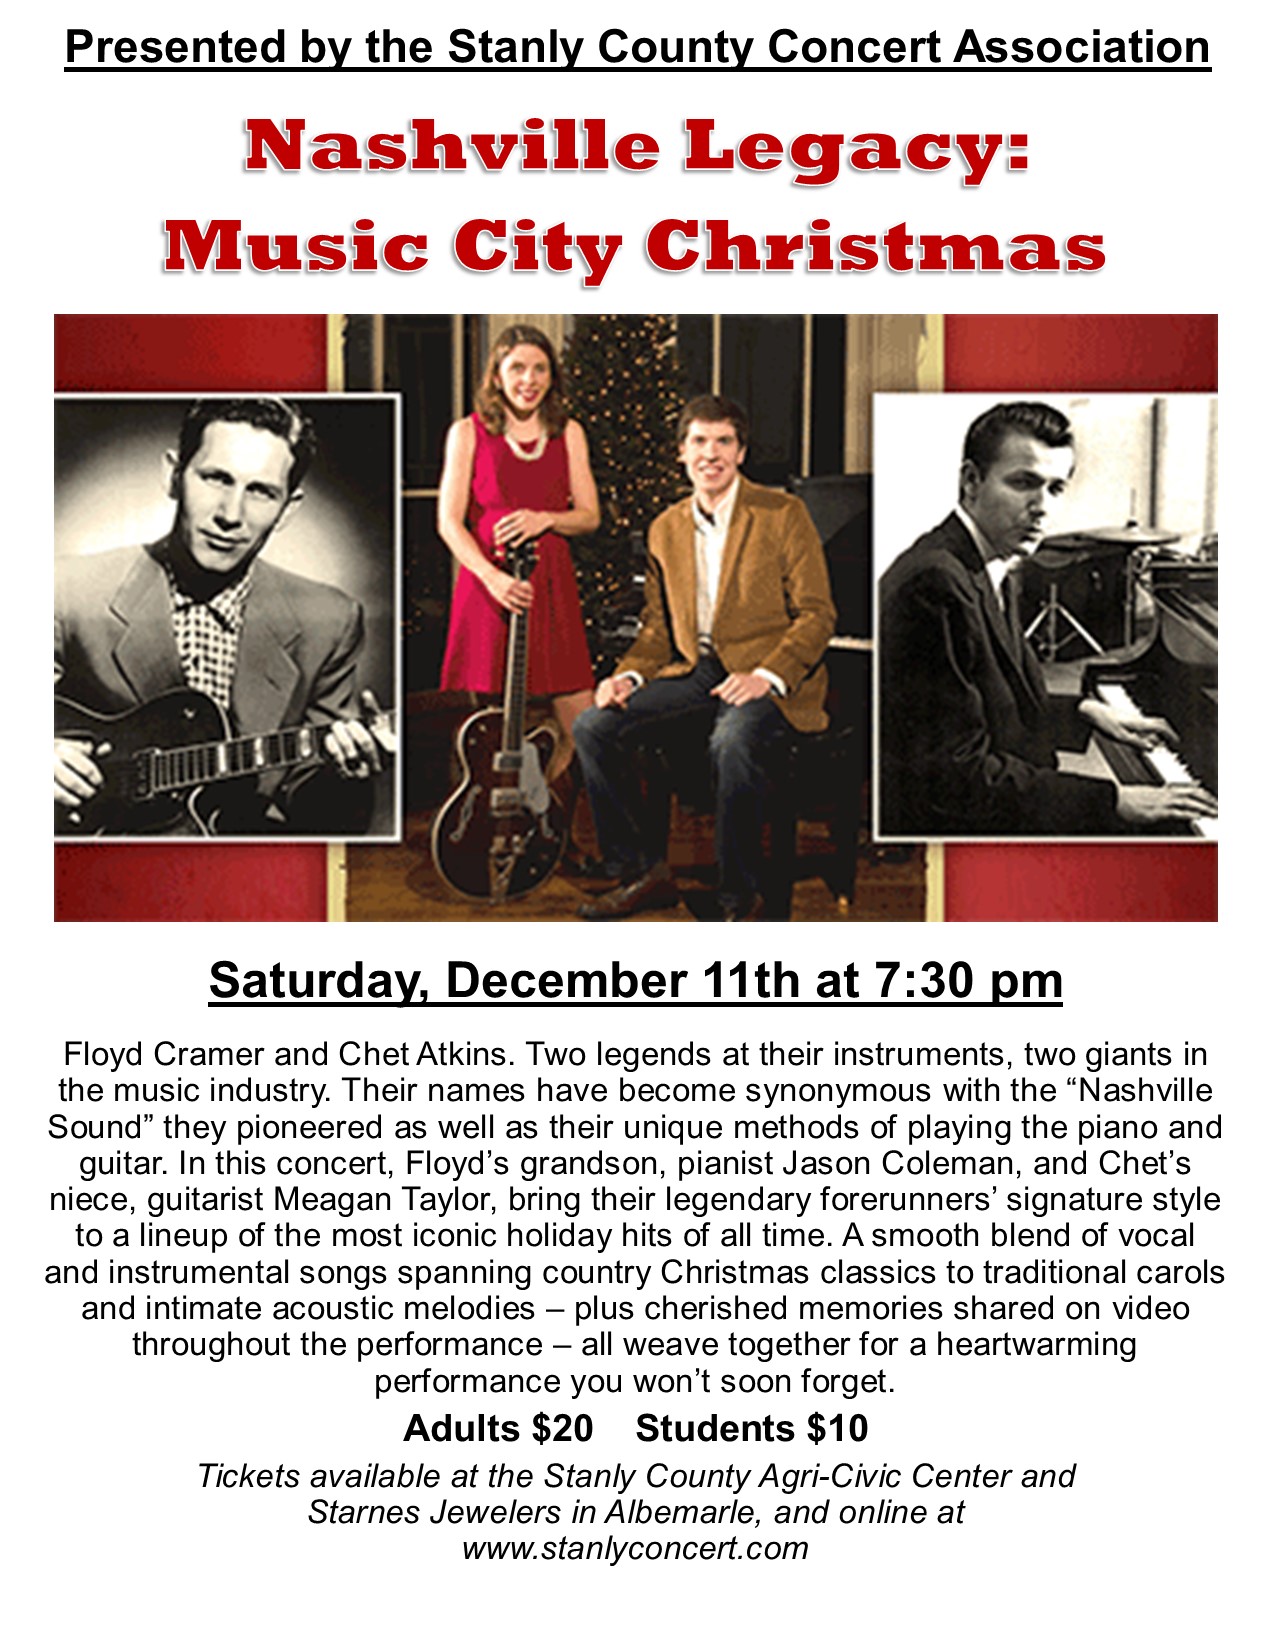 SCCA Presents: Music City Christmas